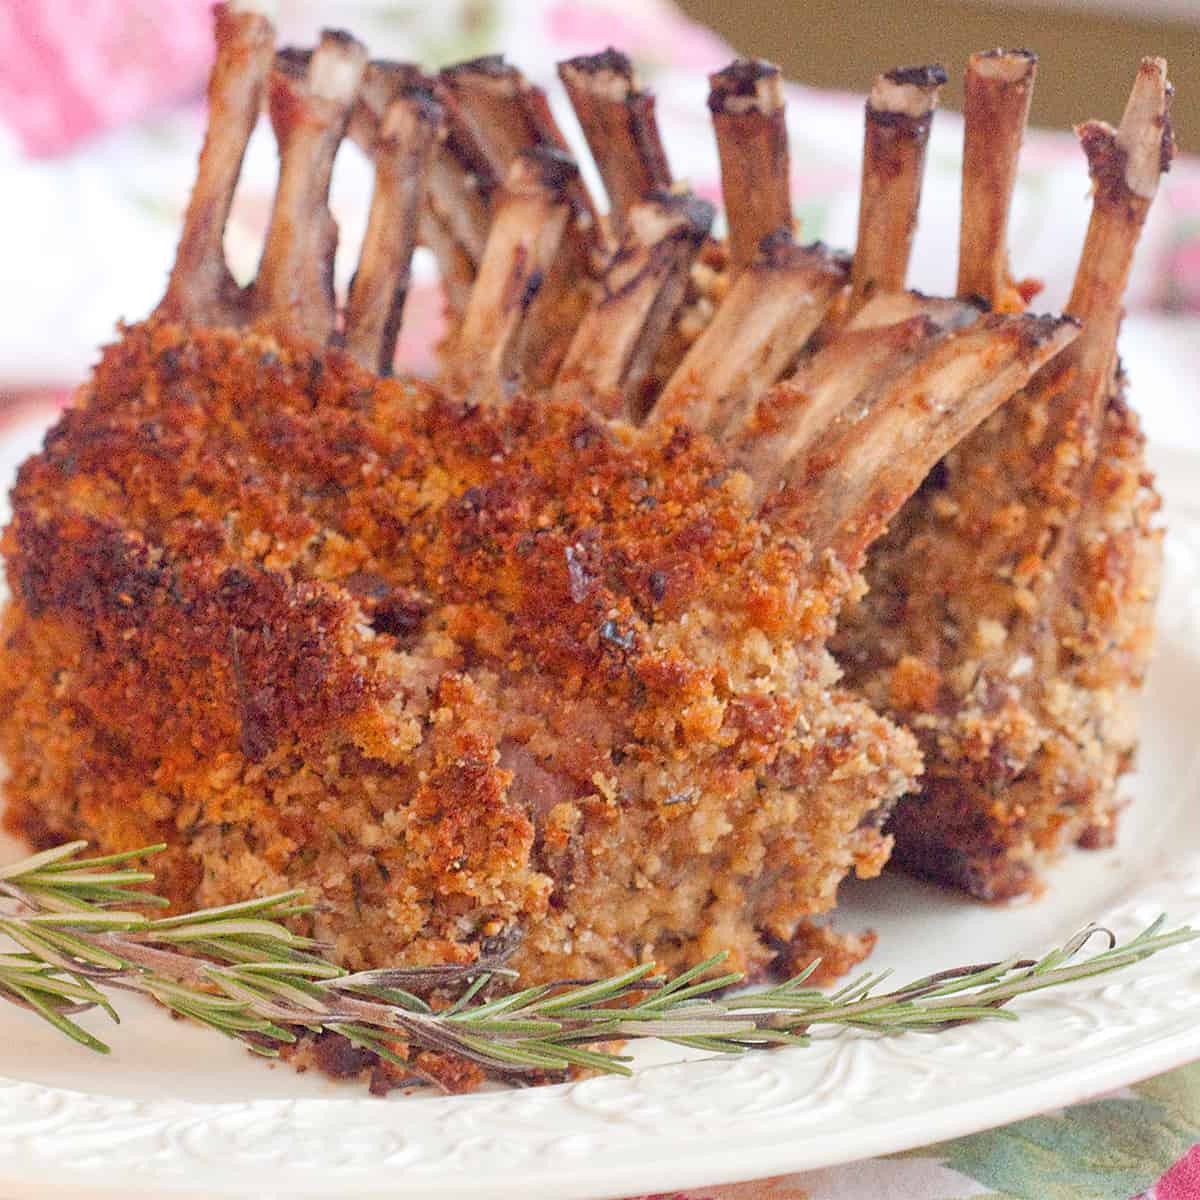 Finished rack of lamb on a white serving plate.